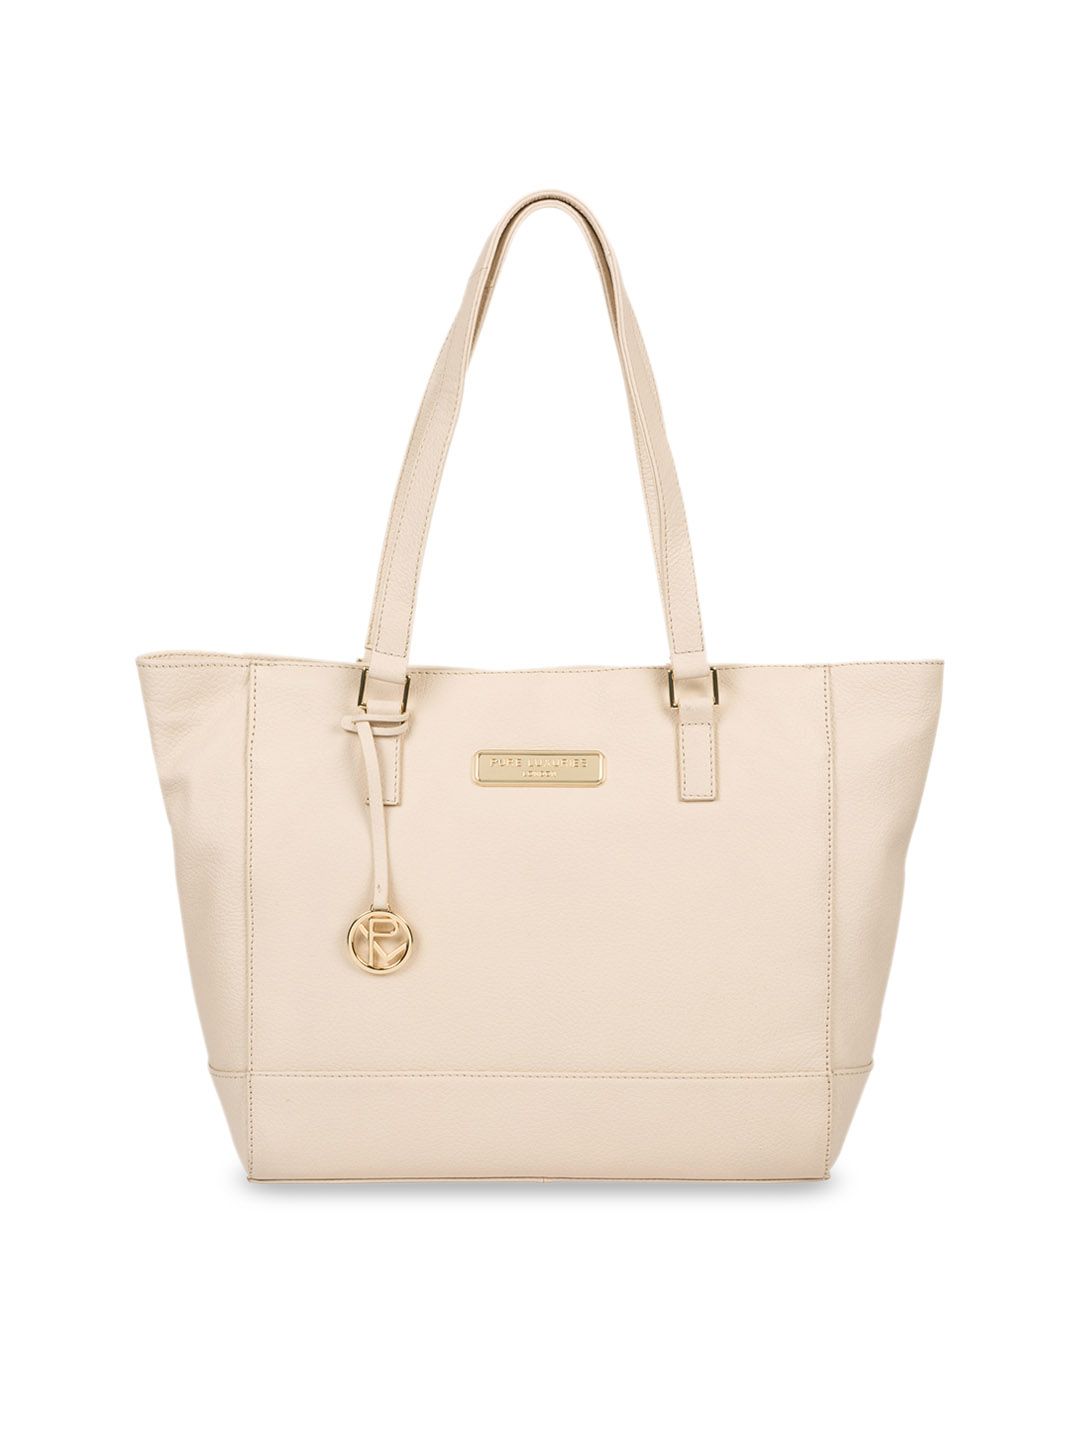 PURE LUXURIES LONDON Women Cream Coloured Solid Genuine Leather Sophie Tote Bag Price in India